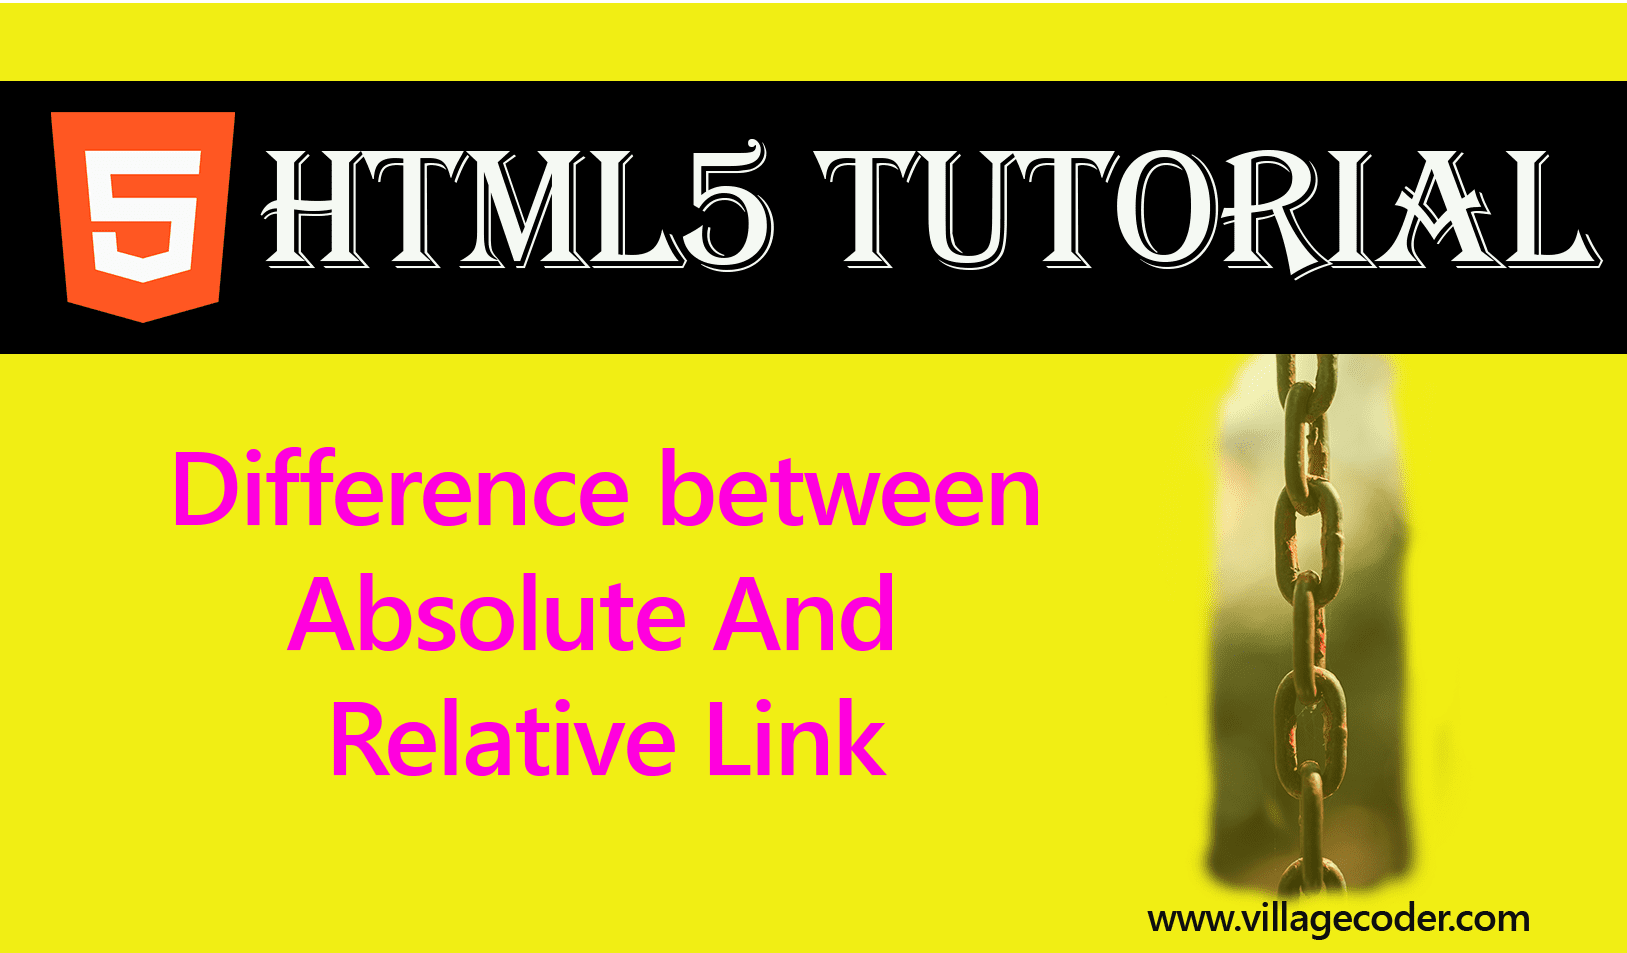 Difference between Absolute and Relative links